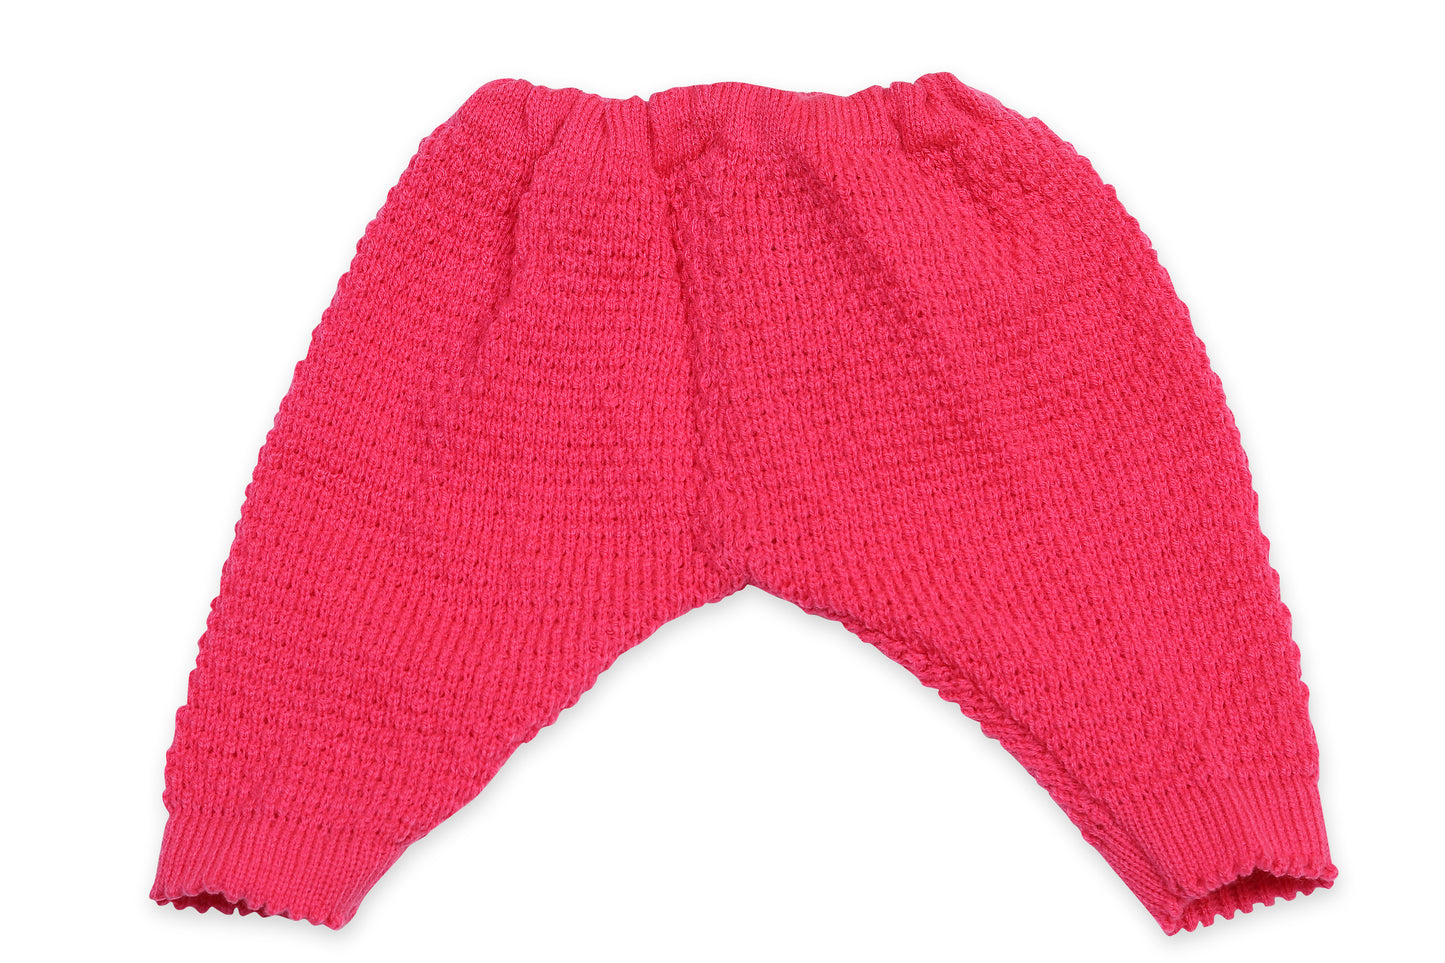 Baby Knitted Sweater, Leggings, Cap & Booties Full Suit (4 Pcs) Strawberry